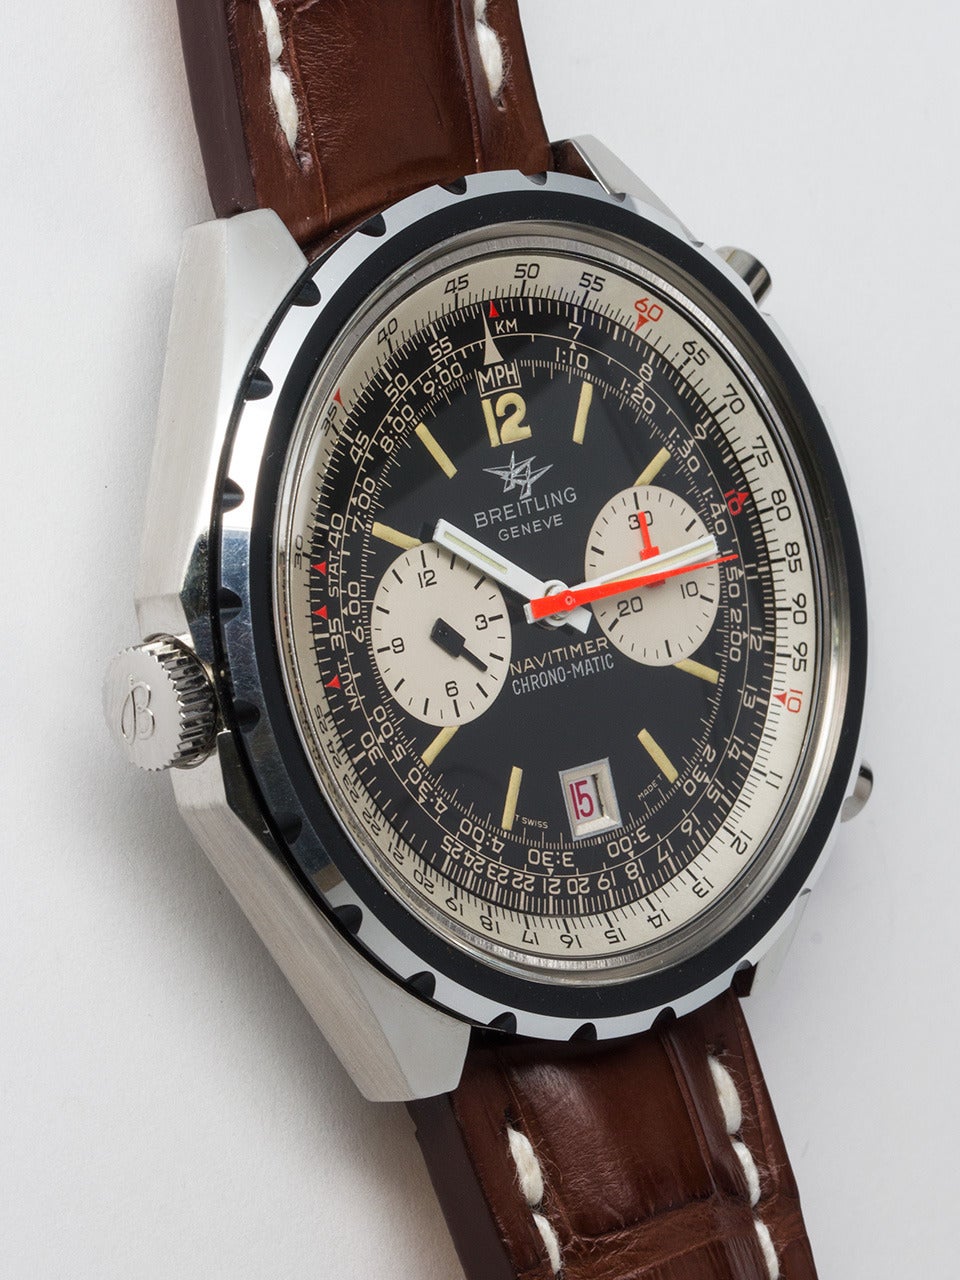 Breitling Stainless Steel Navitimer Chrono-matic ref 1806 seria l#11525/67 circa . Oversized 48mm diameter aviator's self winding chronograph. Beautiful condition example recently serviced at Breitling service center. Includes documentation of work